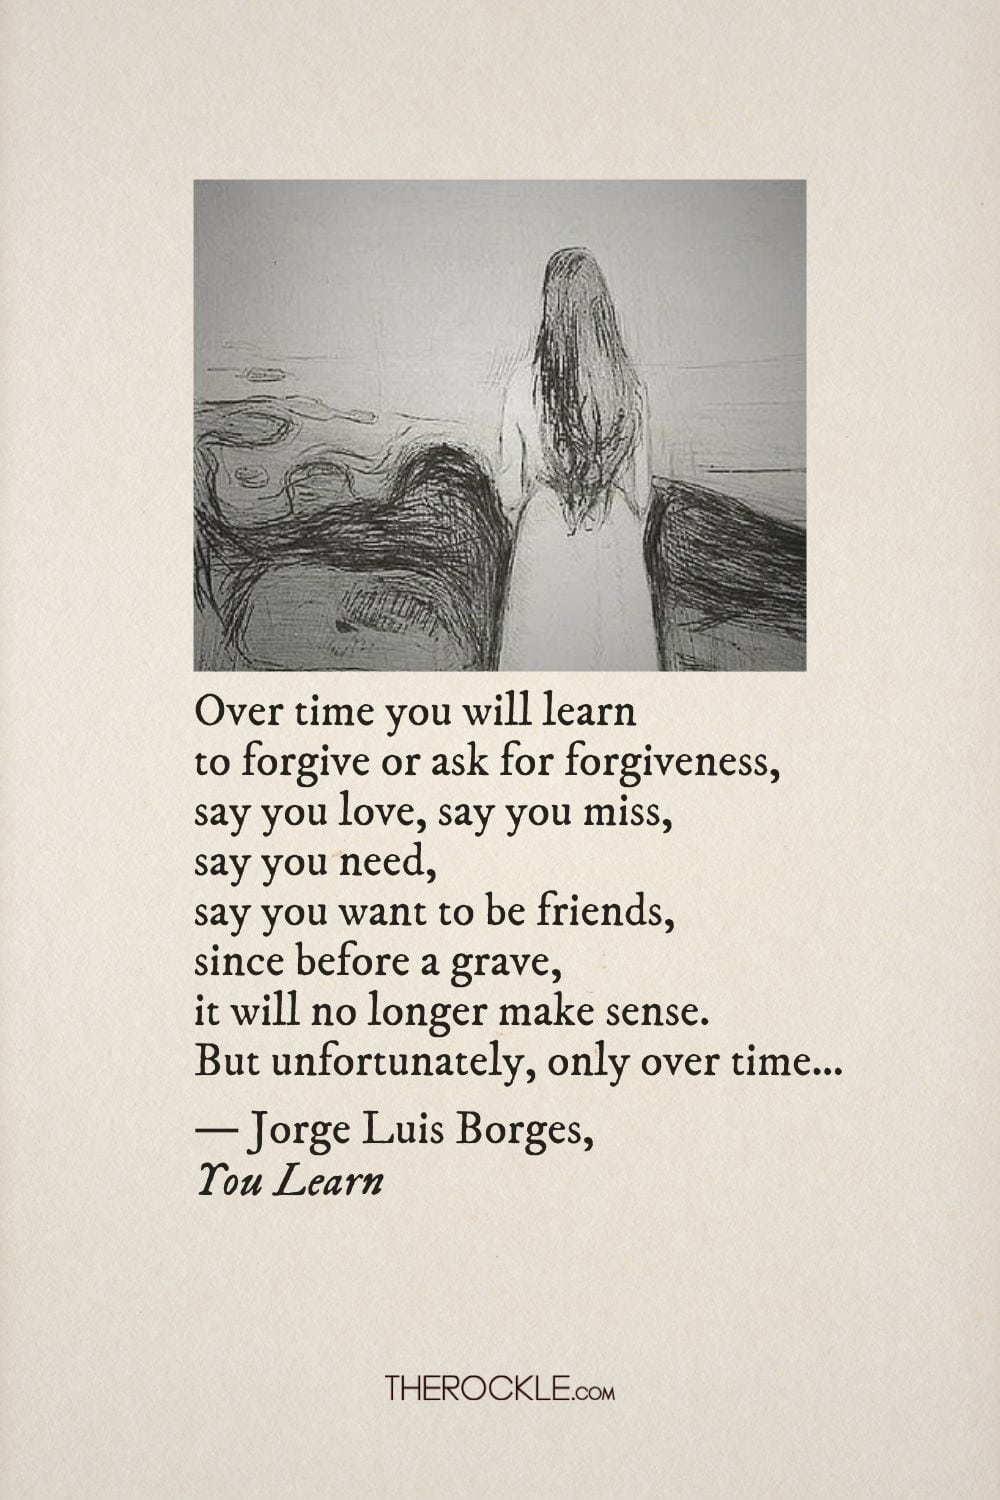 Jorge Luis Borges quote about the passage of time